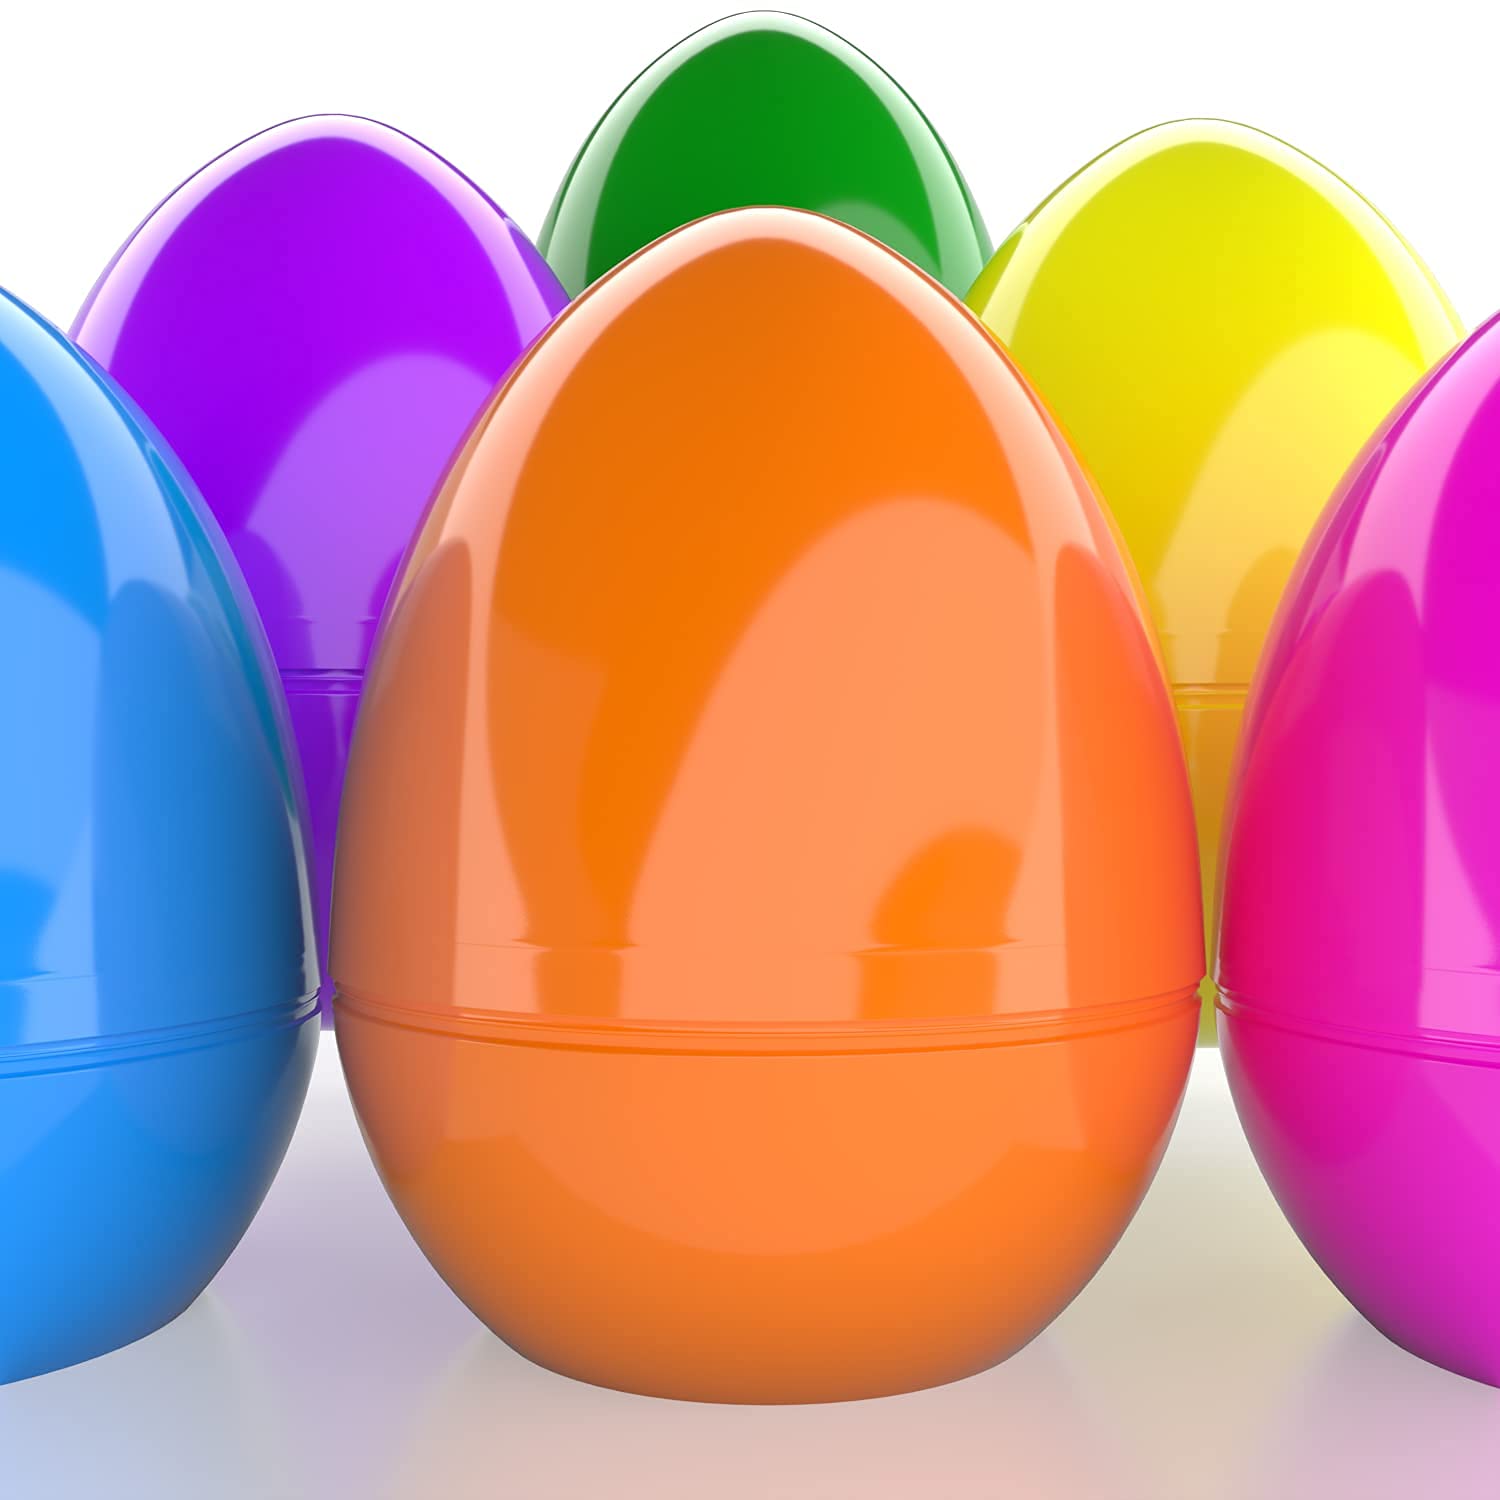 Jumbo Fillable Easter Eggs Colorful Bright Plastic Easter Eggs, Stands Upright, Perfect For Easter Egg Hunt, Surprise Egg, Easter Hunt, Assorted Colors, 6